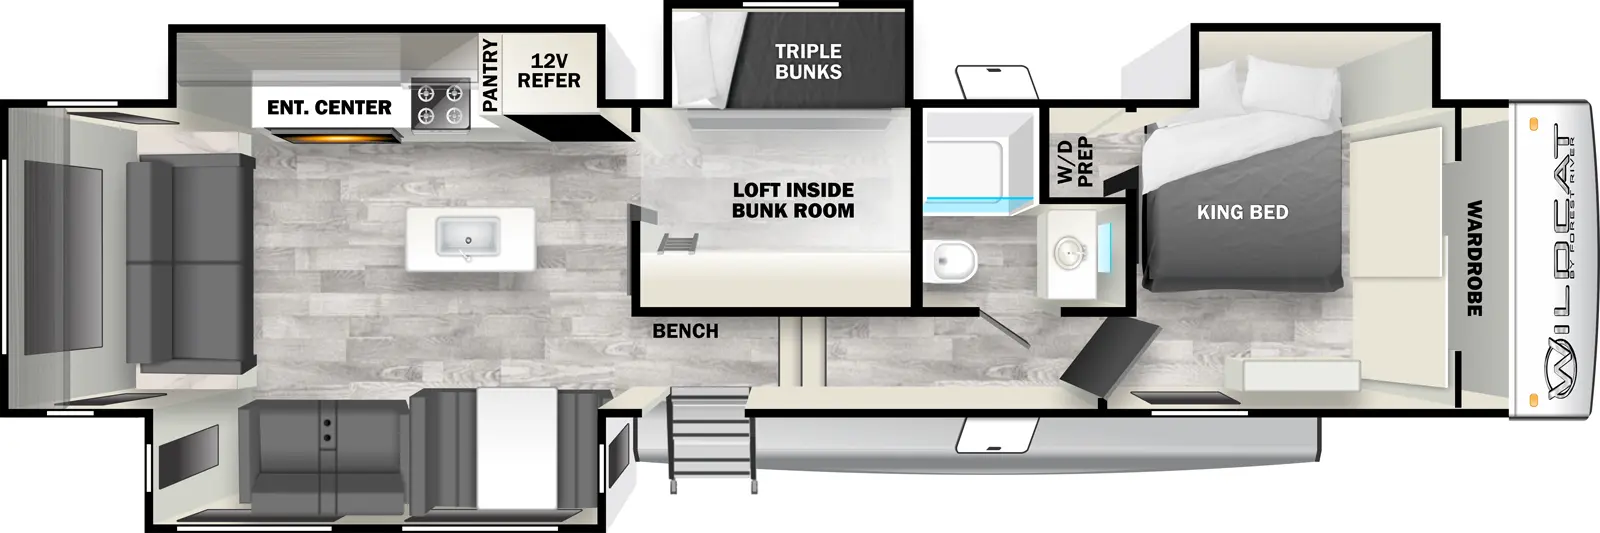 The 36MB has four slideouts and one entry. Interior layout front to back: front wardrobe, off-door side king bed slideout, and closet with washer/dryer prep; off-door side full bathroom; steps down to entry and bench; mid room with triple bunk slideout, and a loft inside the bunk room; off-door side slideout with 12V refrigerator, pantry, cooktop, and entertainment center; kitchen island with sink; door side slideout with dinette and seating; rear seating.